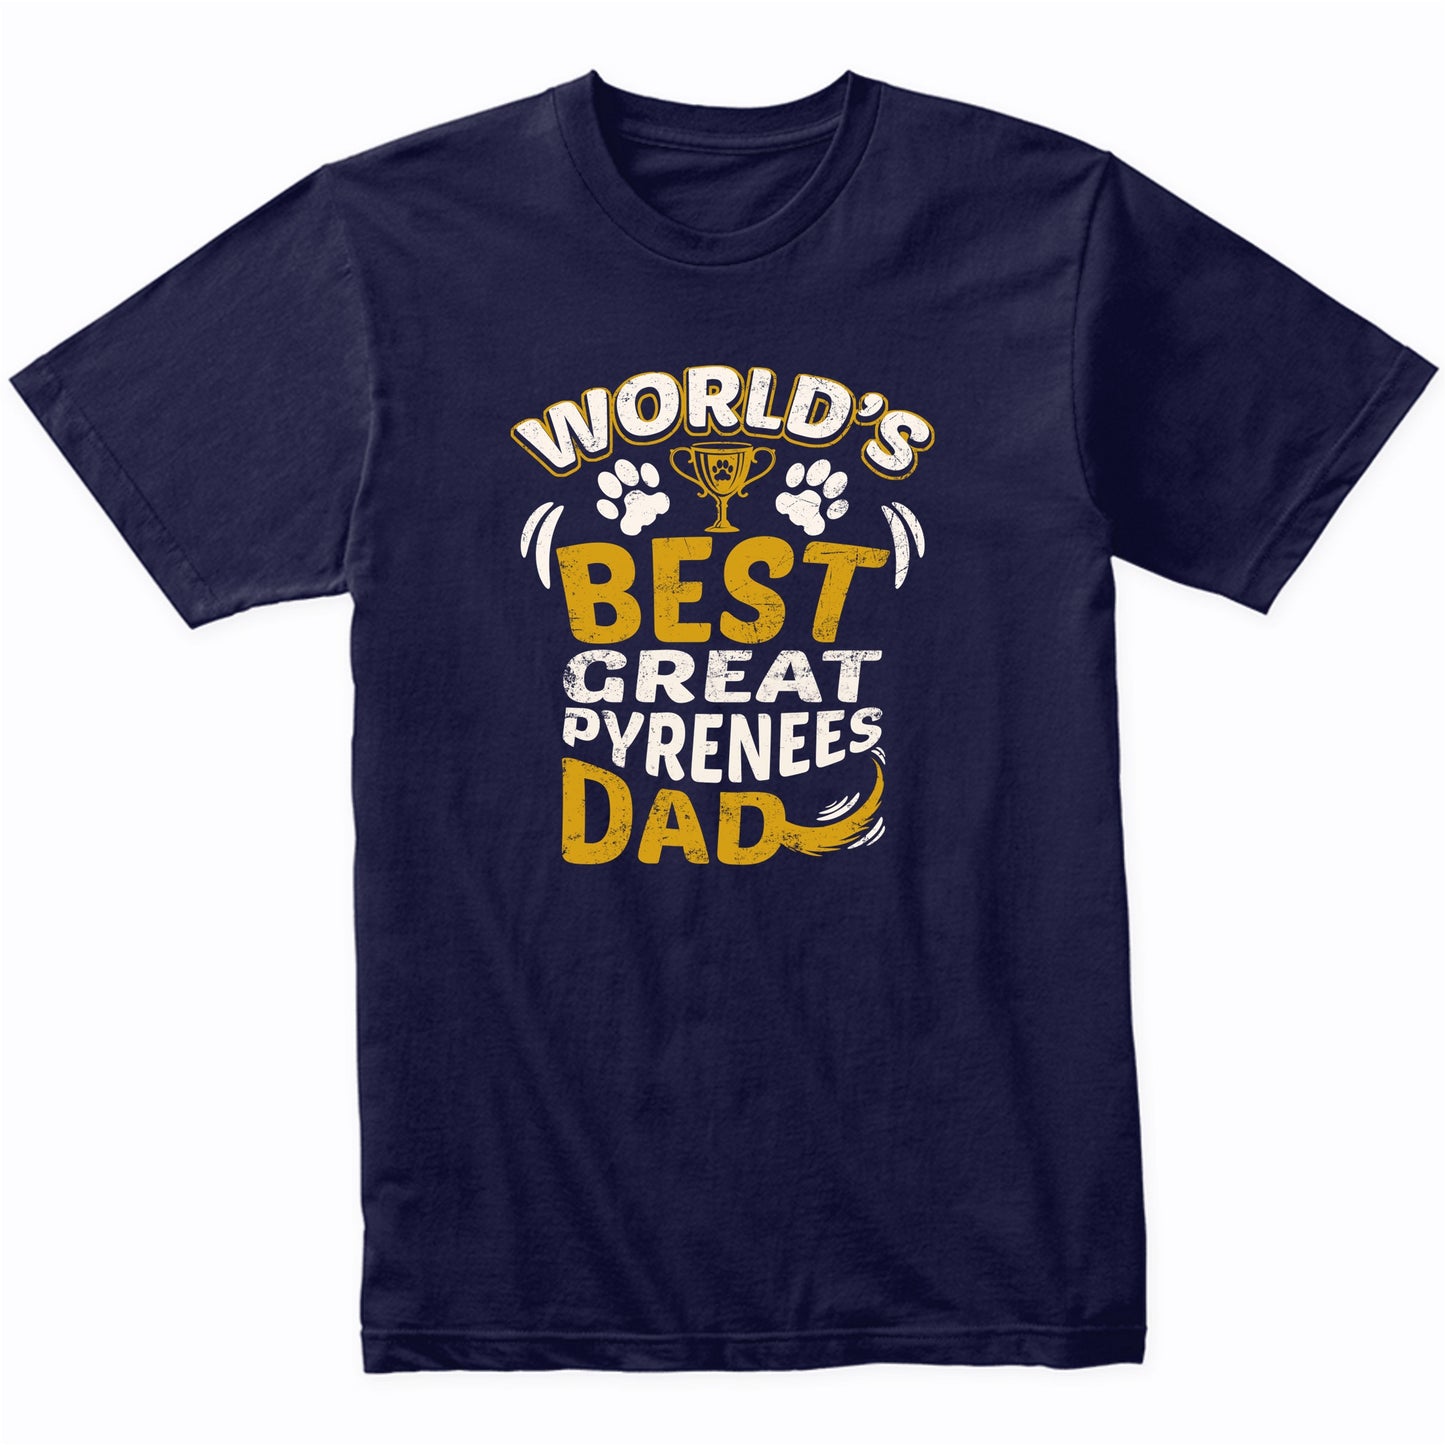 World's Best Great Pyrenees Dad Graphic T-Shirt